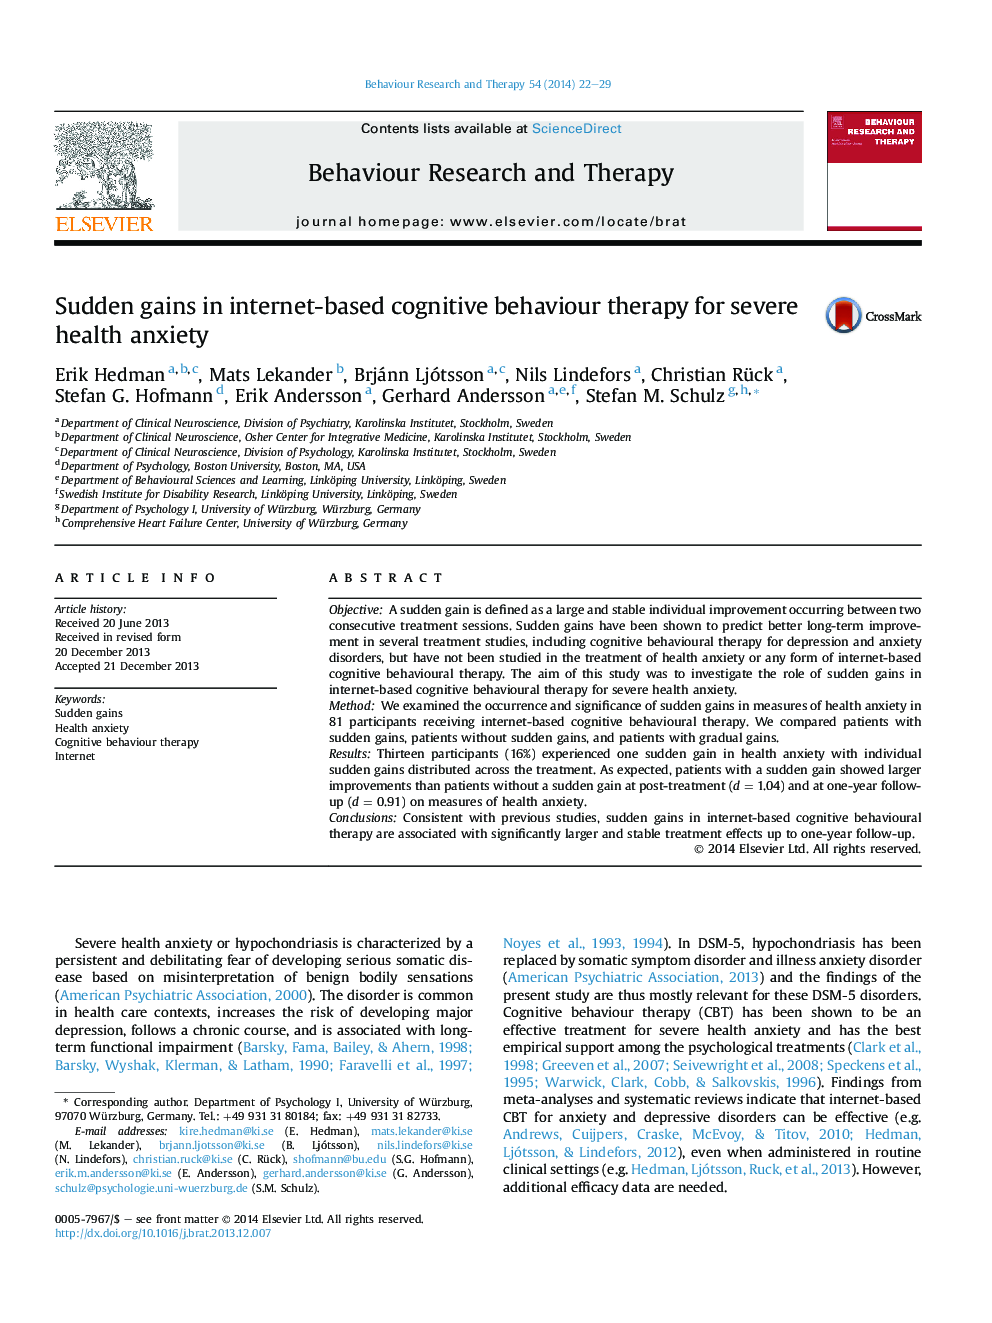 Sudden gains in internet-based cognitive behaviour therapy for severe health anxiety